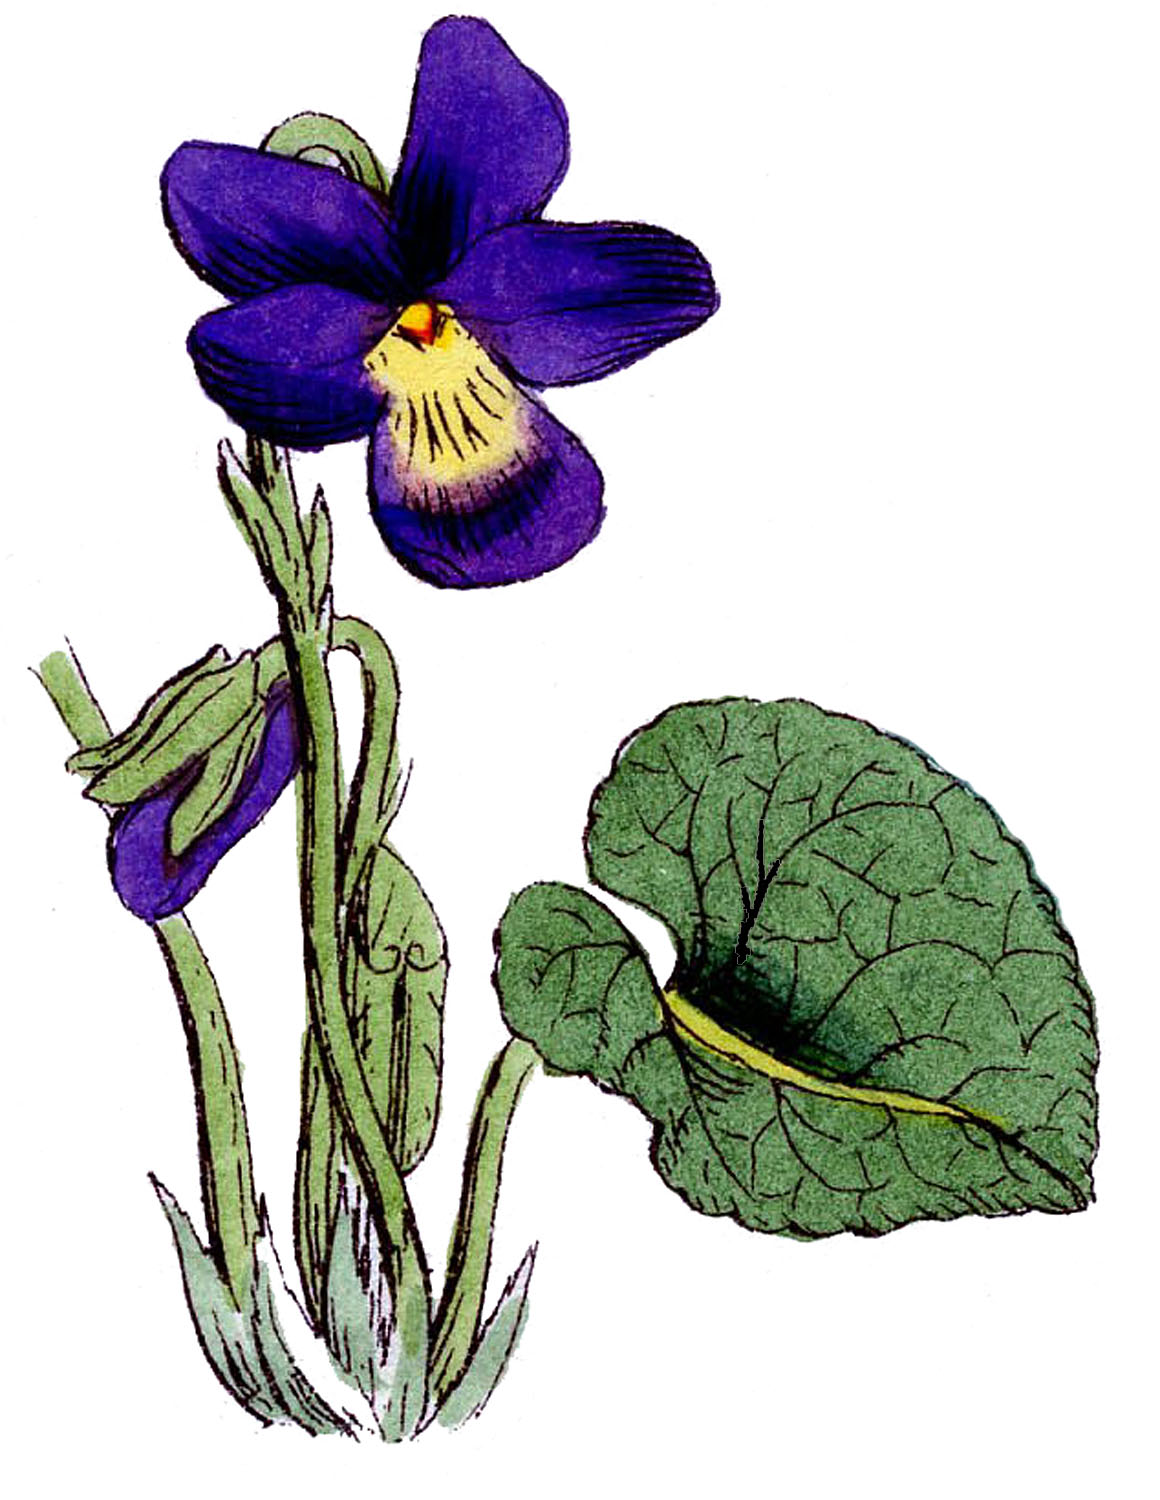 Vintage Floral Images - 3 Lovely Violets - The Graphics Fairy ...